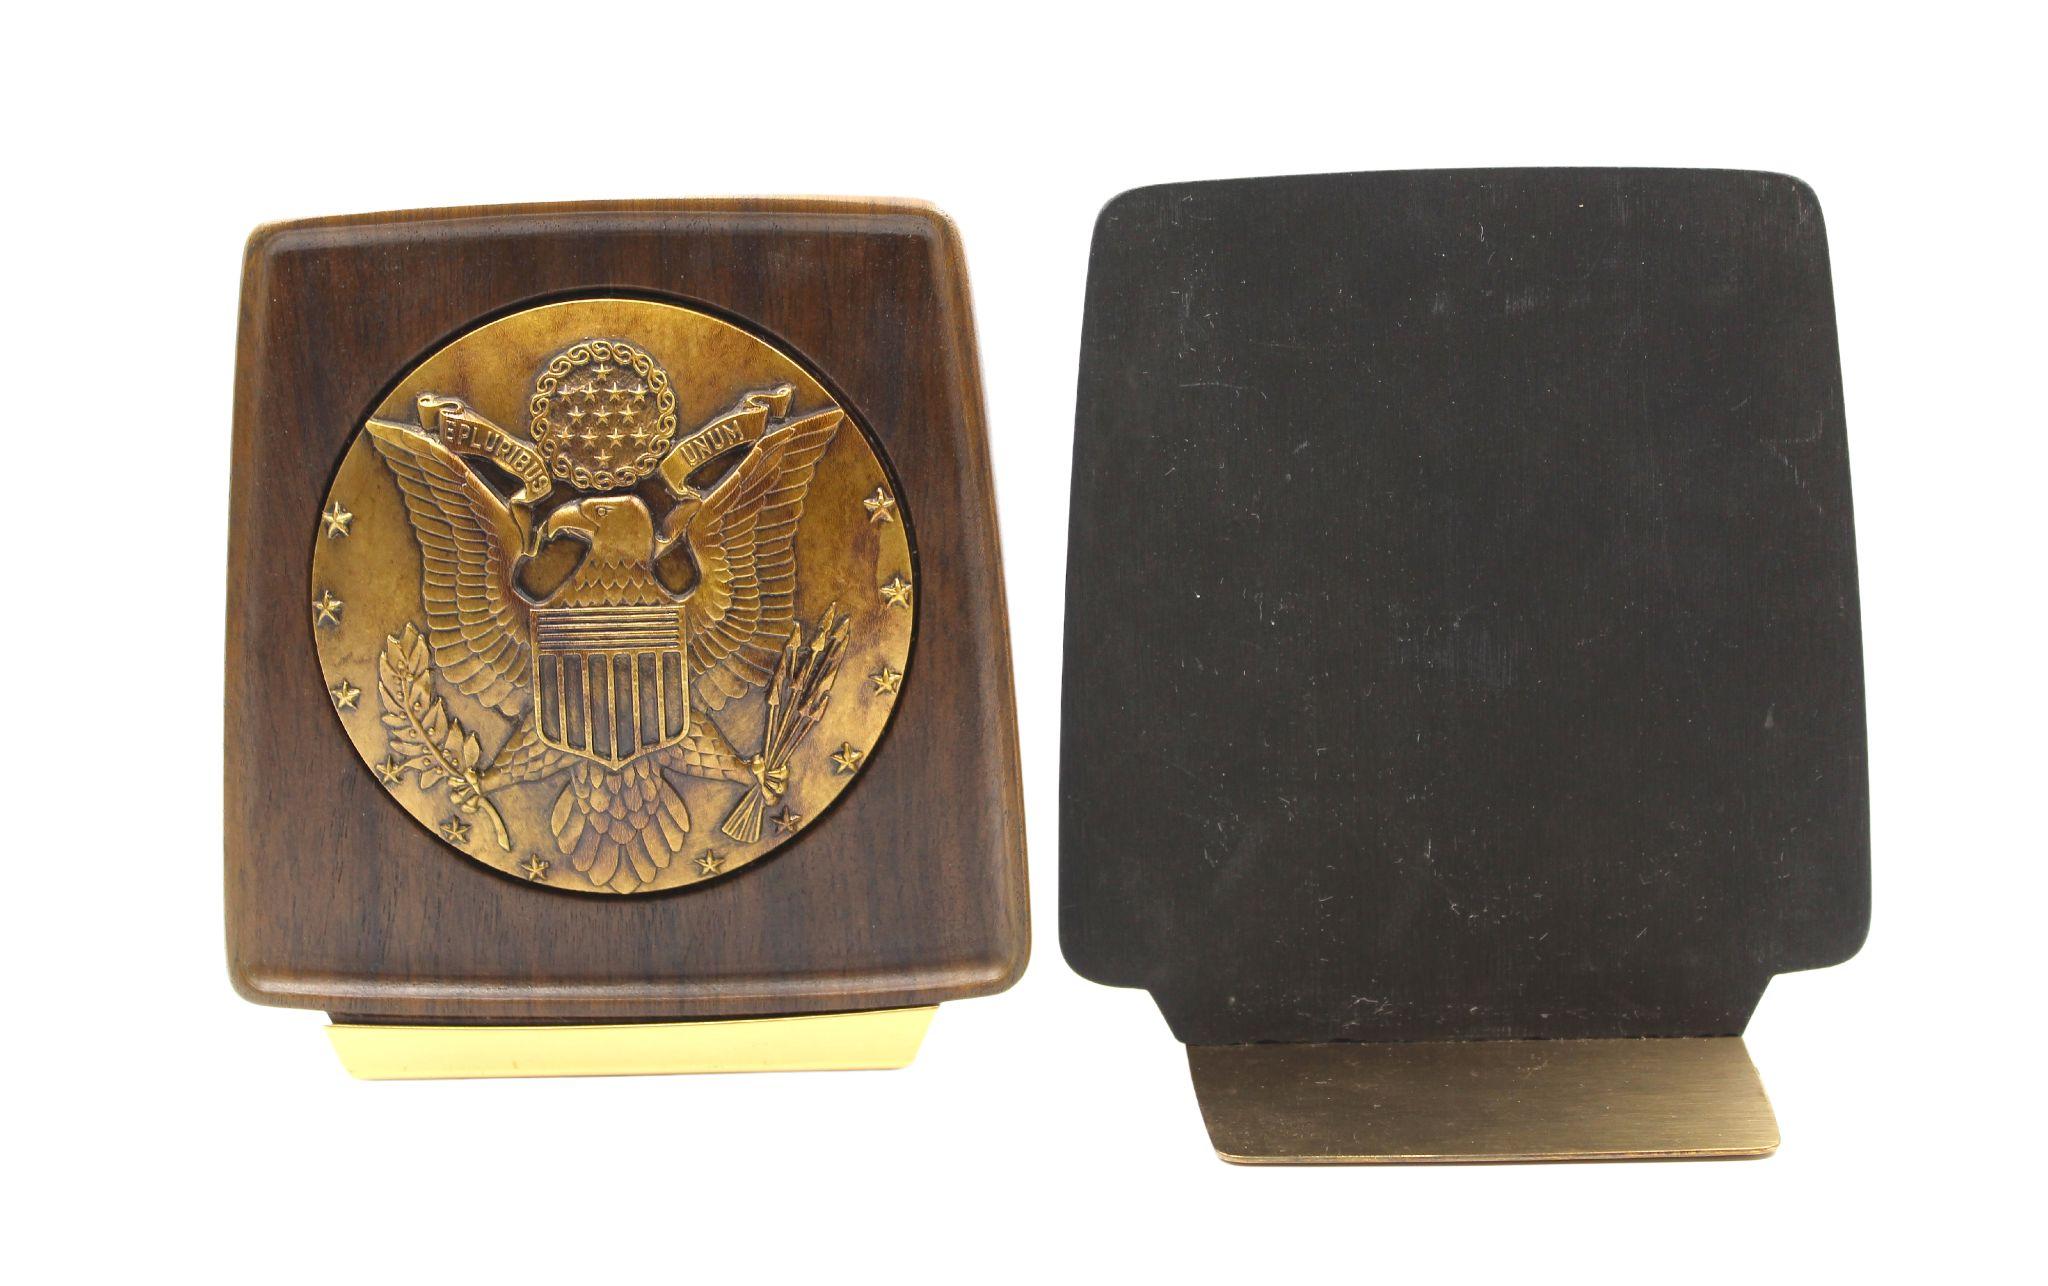 Presented is a pair of vintage U.S. Great Seal bookends. The bookends feature a brass-colored, raised relief U.S. Great Seal at center. The round seal is encased in a rich, walnut-toned resin, with slightly rounded corners and slim brass base. 

The